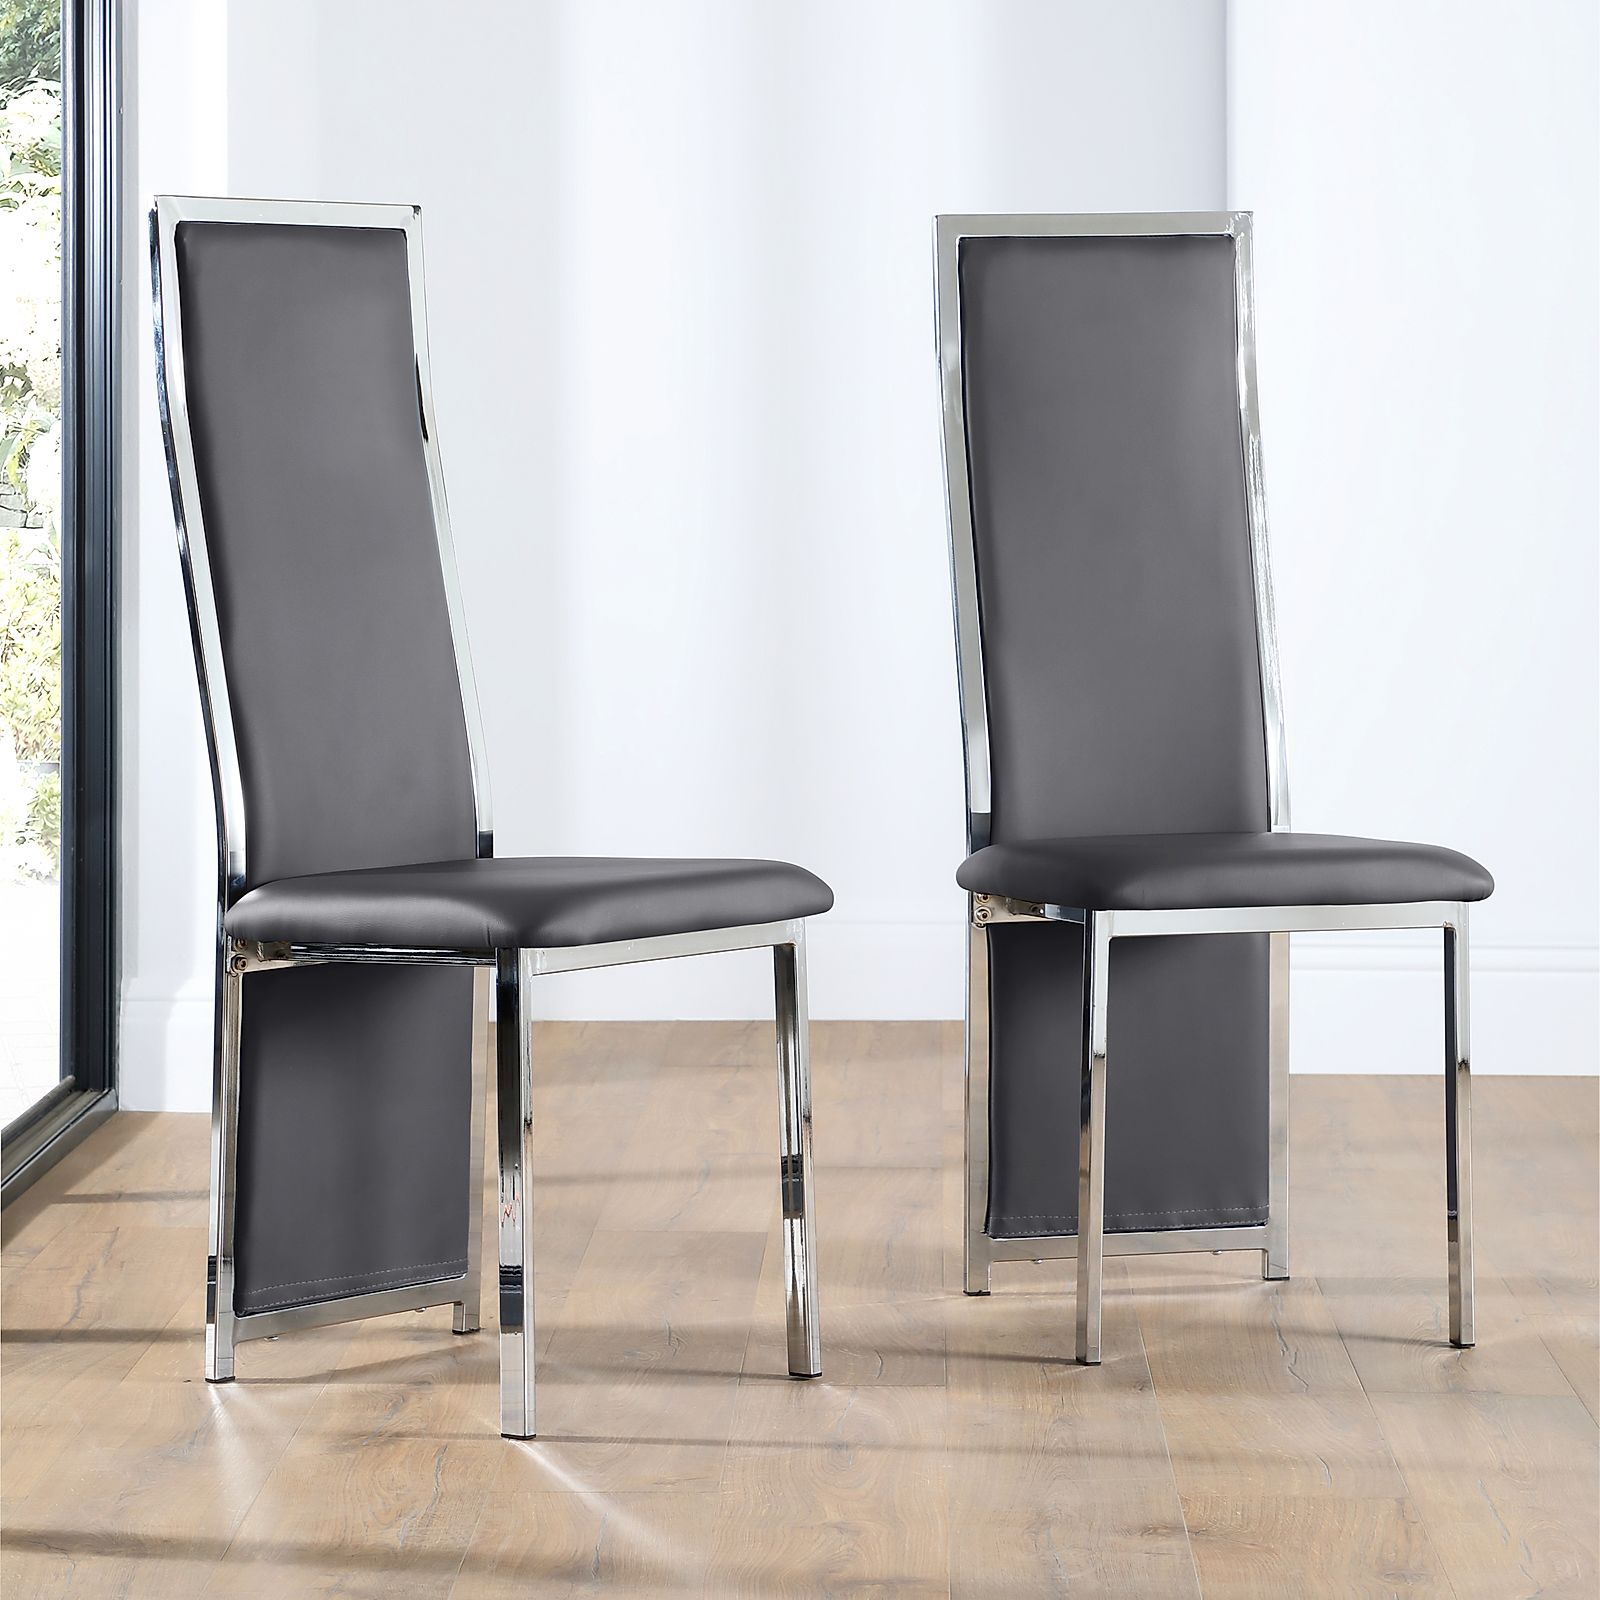 Celeste Grey Leather and Chrome Dining Chair | Furniture Choice